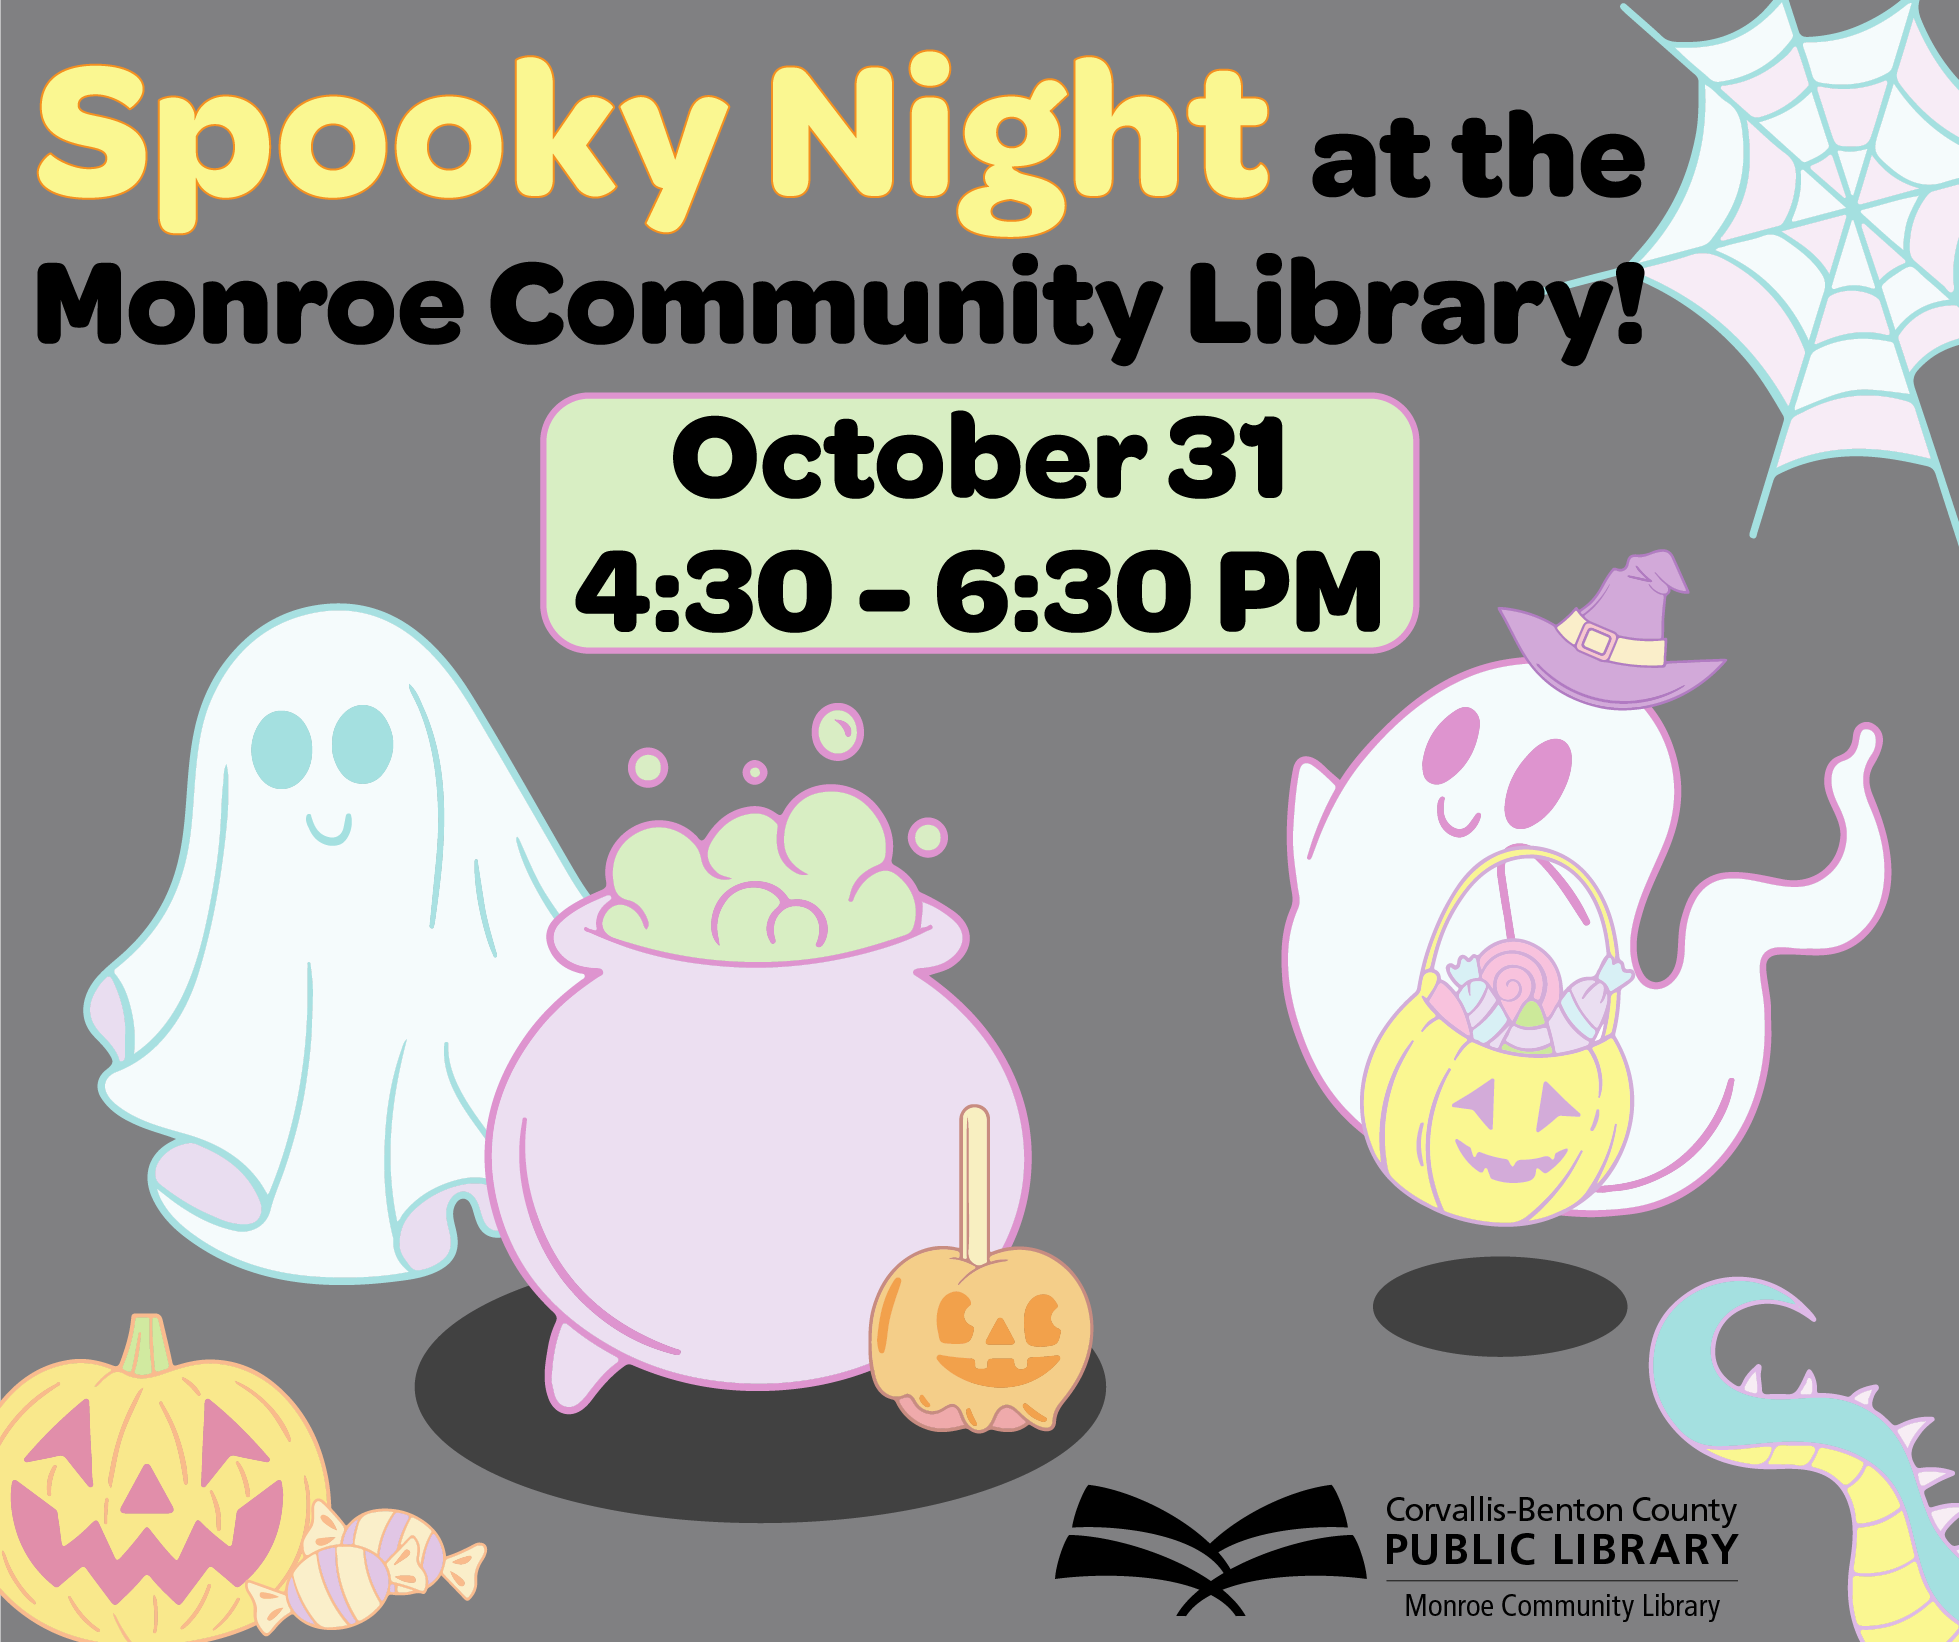 Spooky Night at the Monroe Community Library, October 31, 4:30-6:30 PM